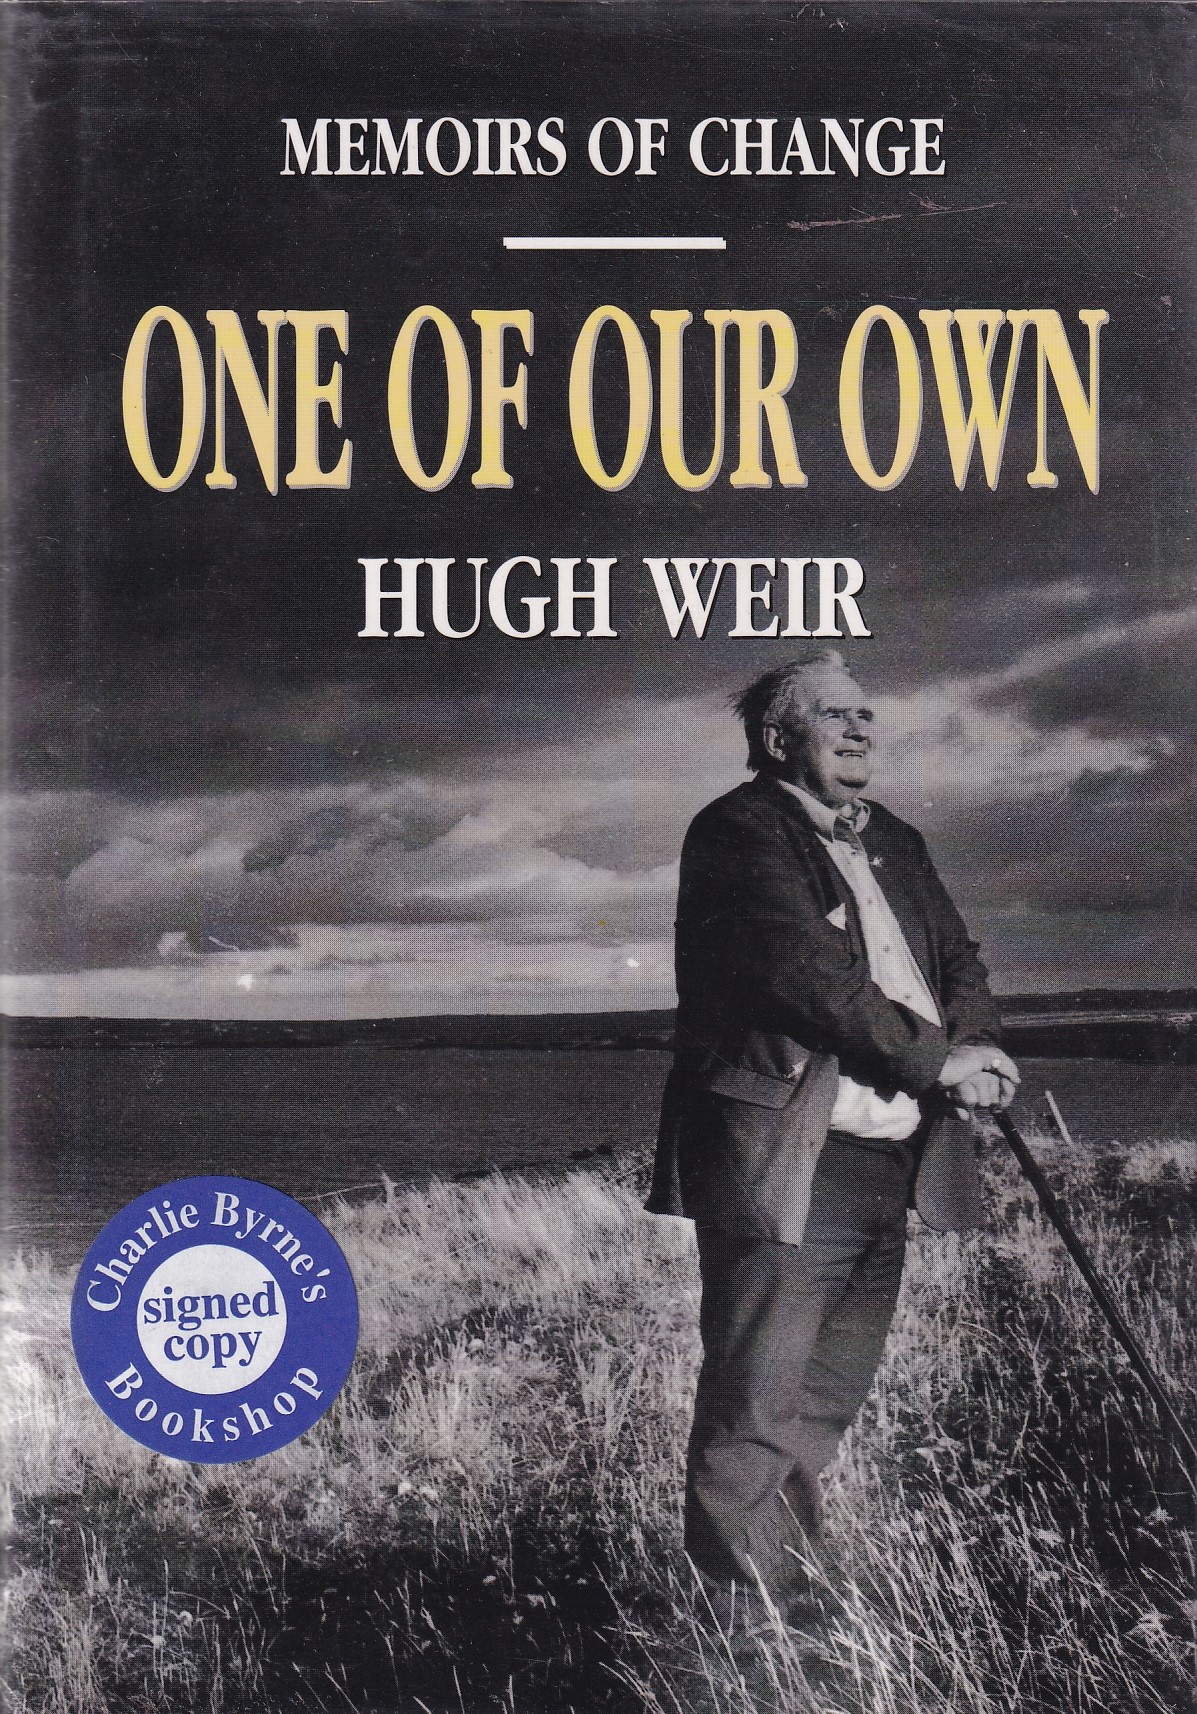 One of Our Own: Memoirs of Change [Signed] by Hugh Weir